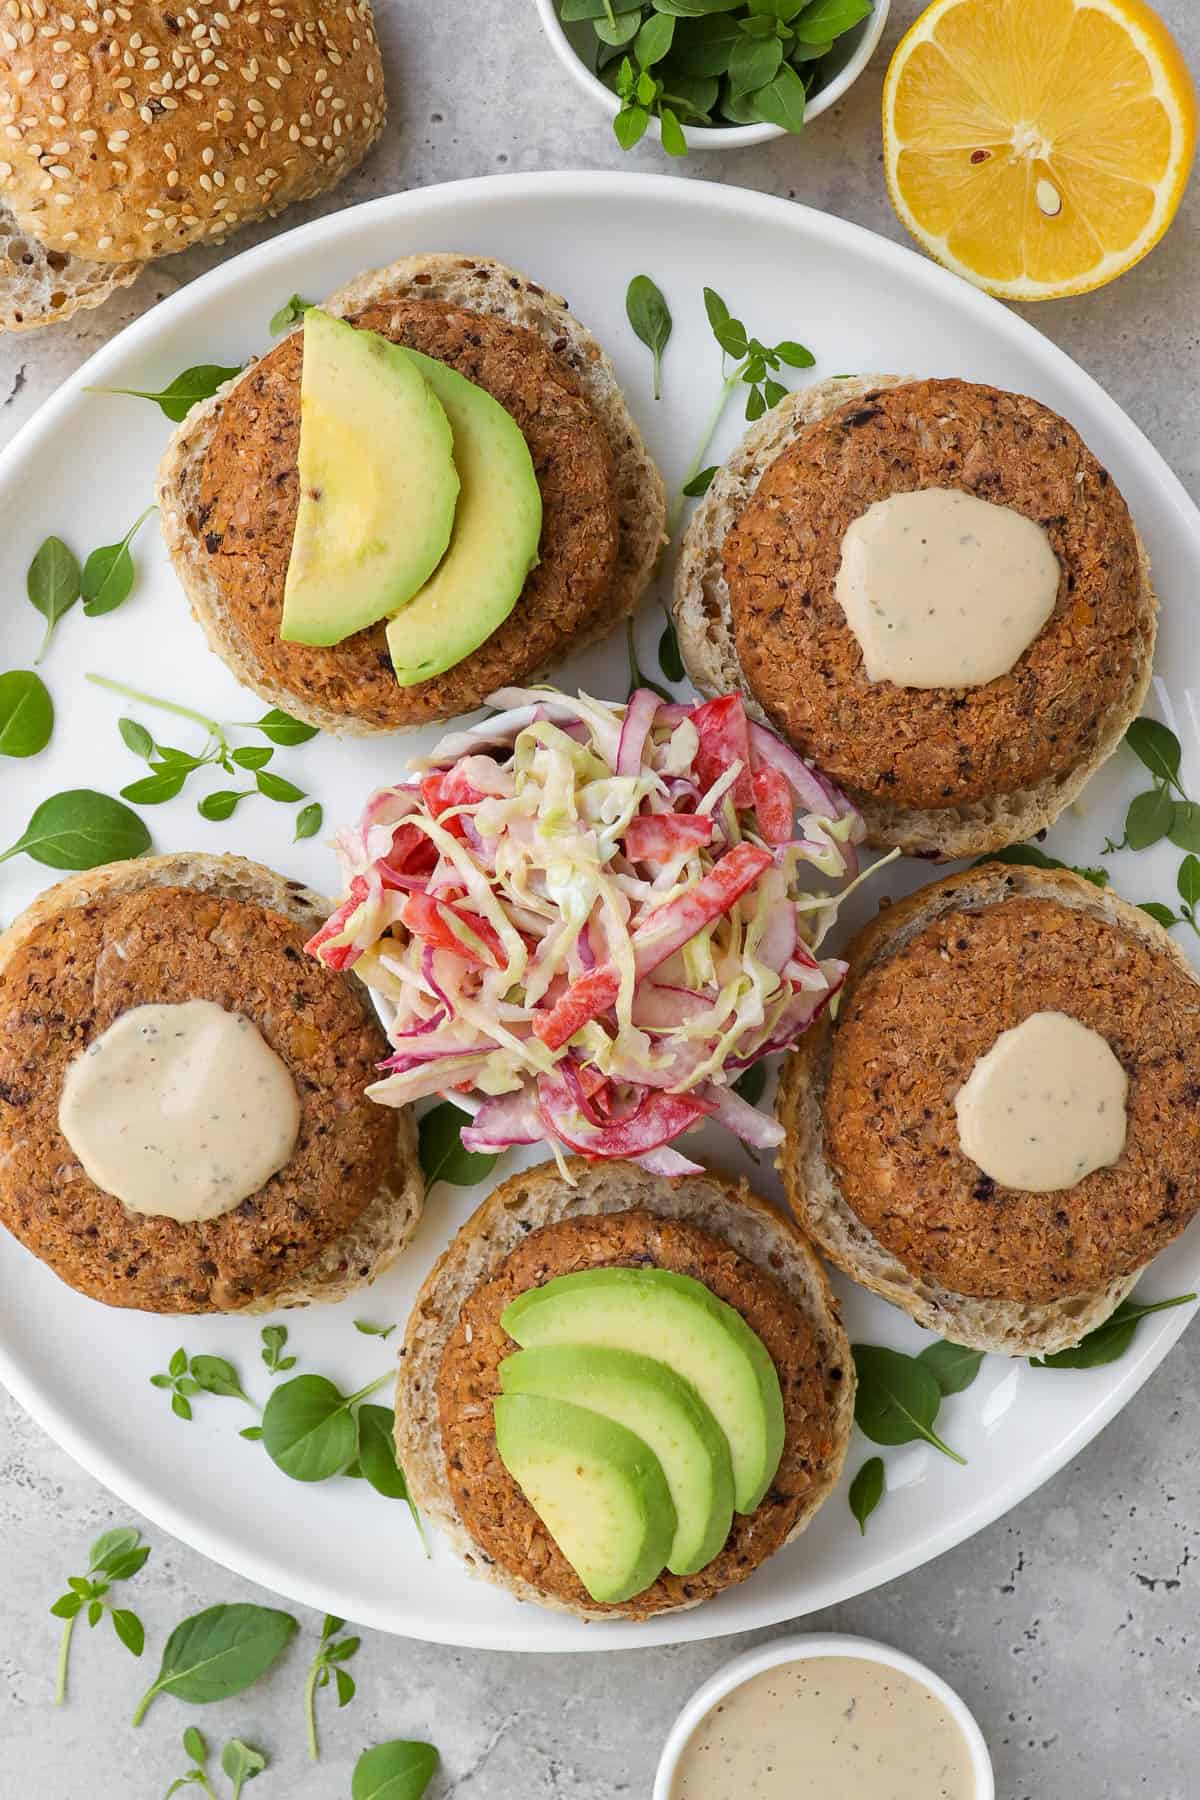 Over view of patties on plate in burger buns with slaw and avocado.